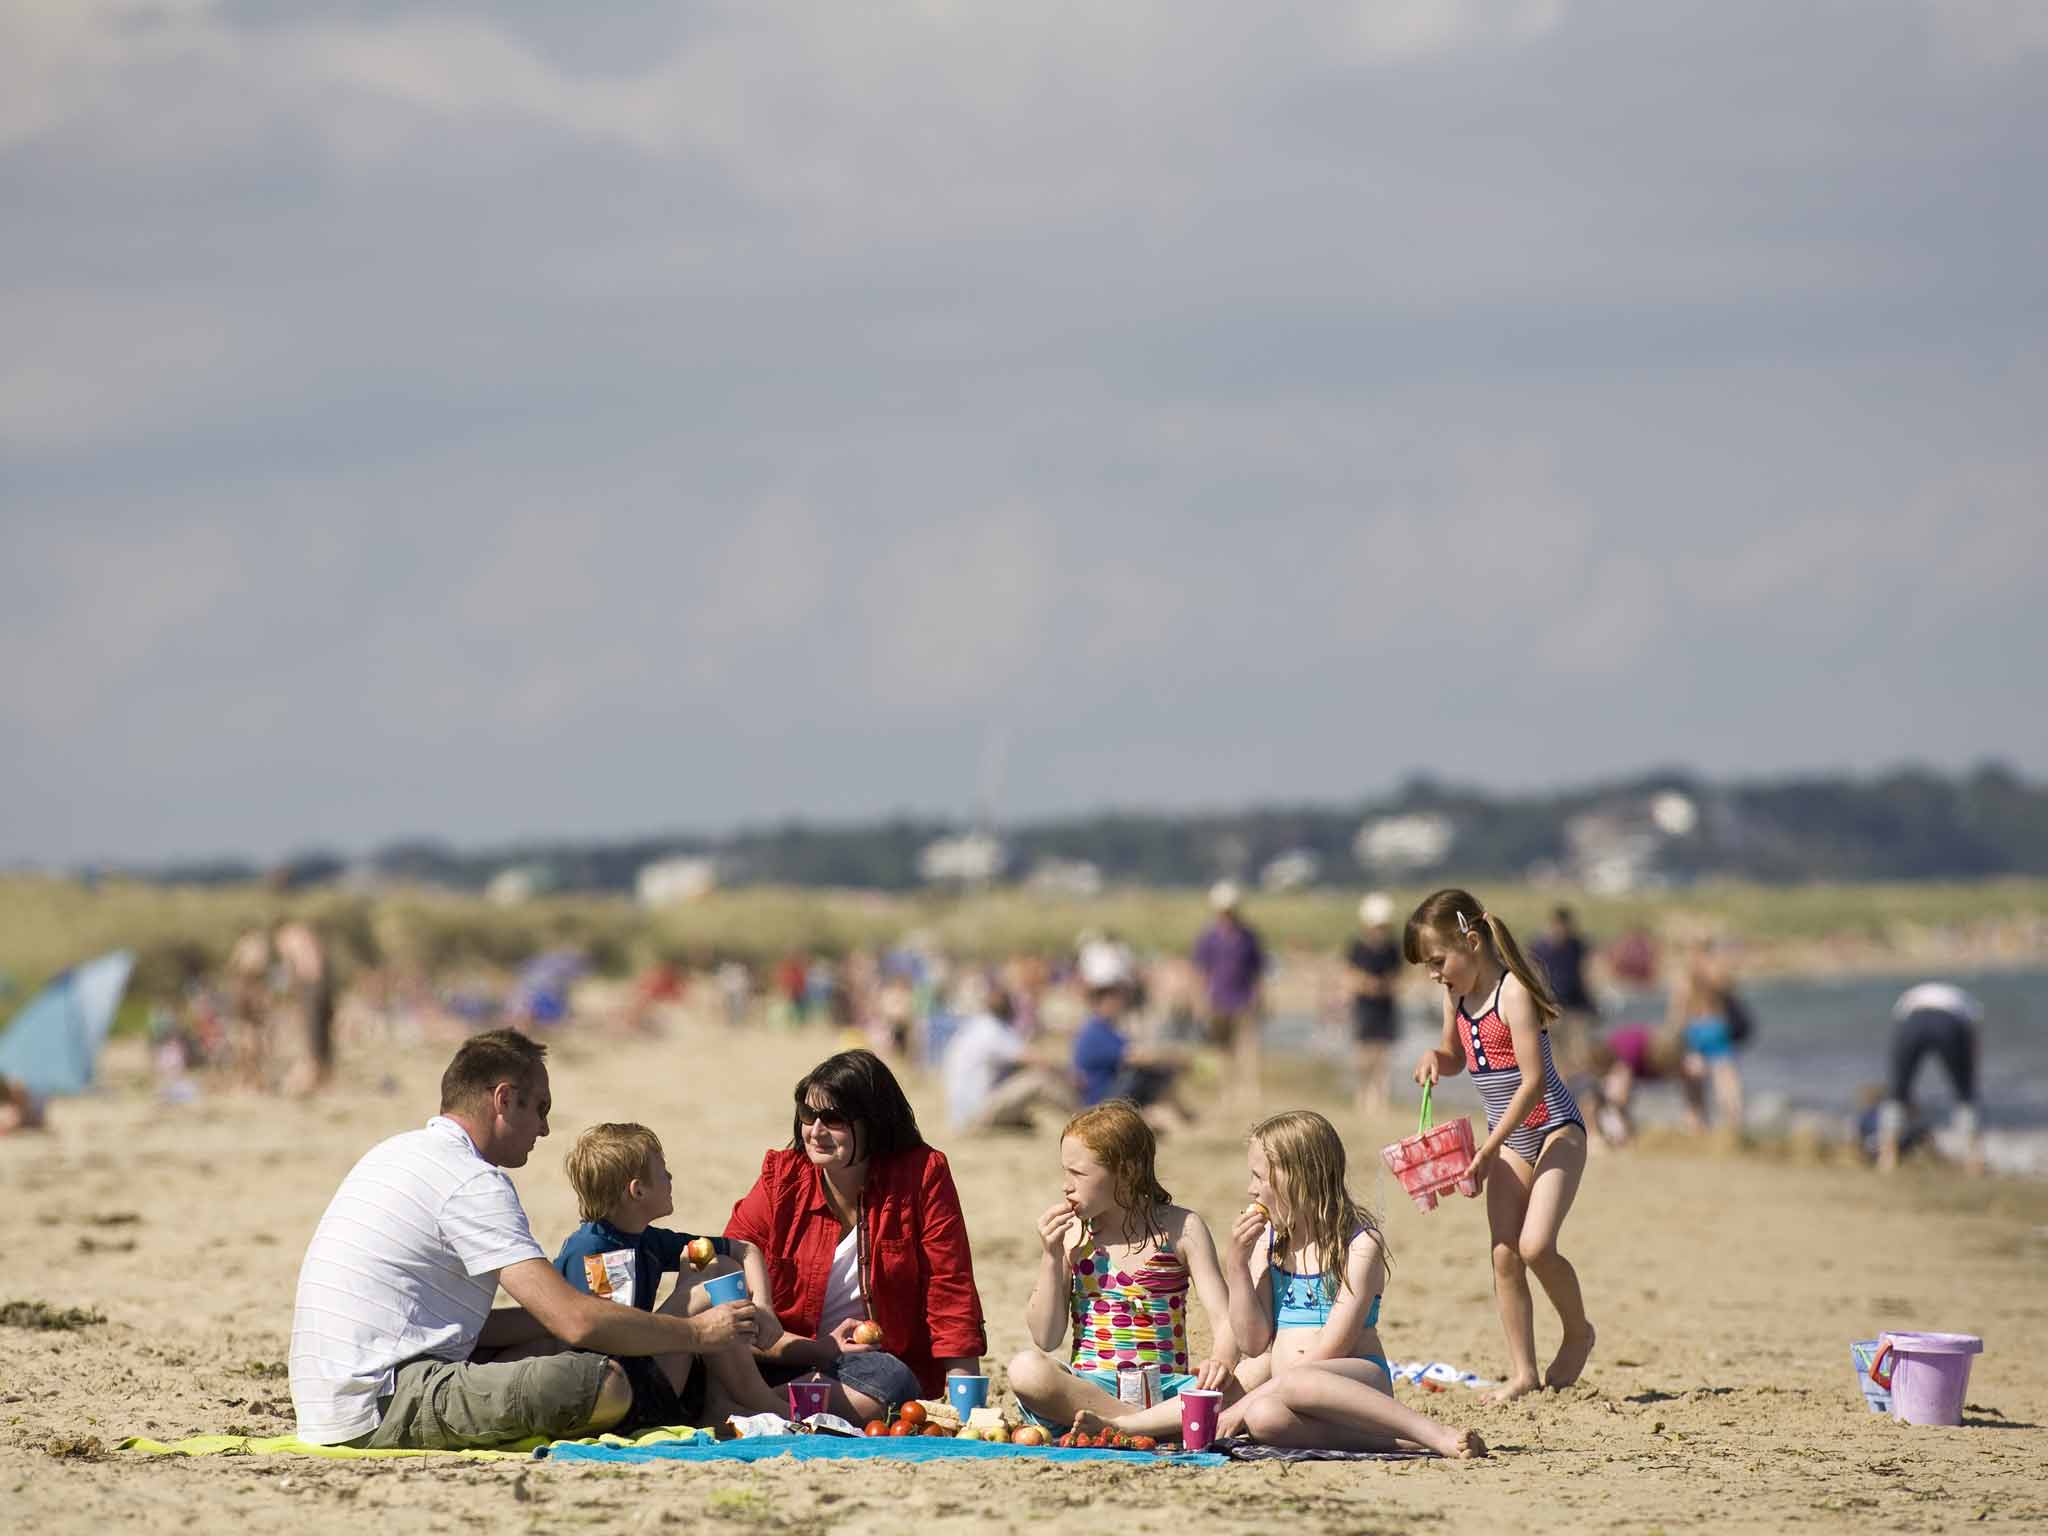 The National Trust is hosting the Big Beach Picnic at 26 venues on 4 July